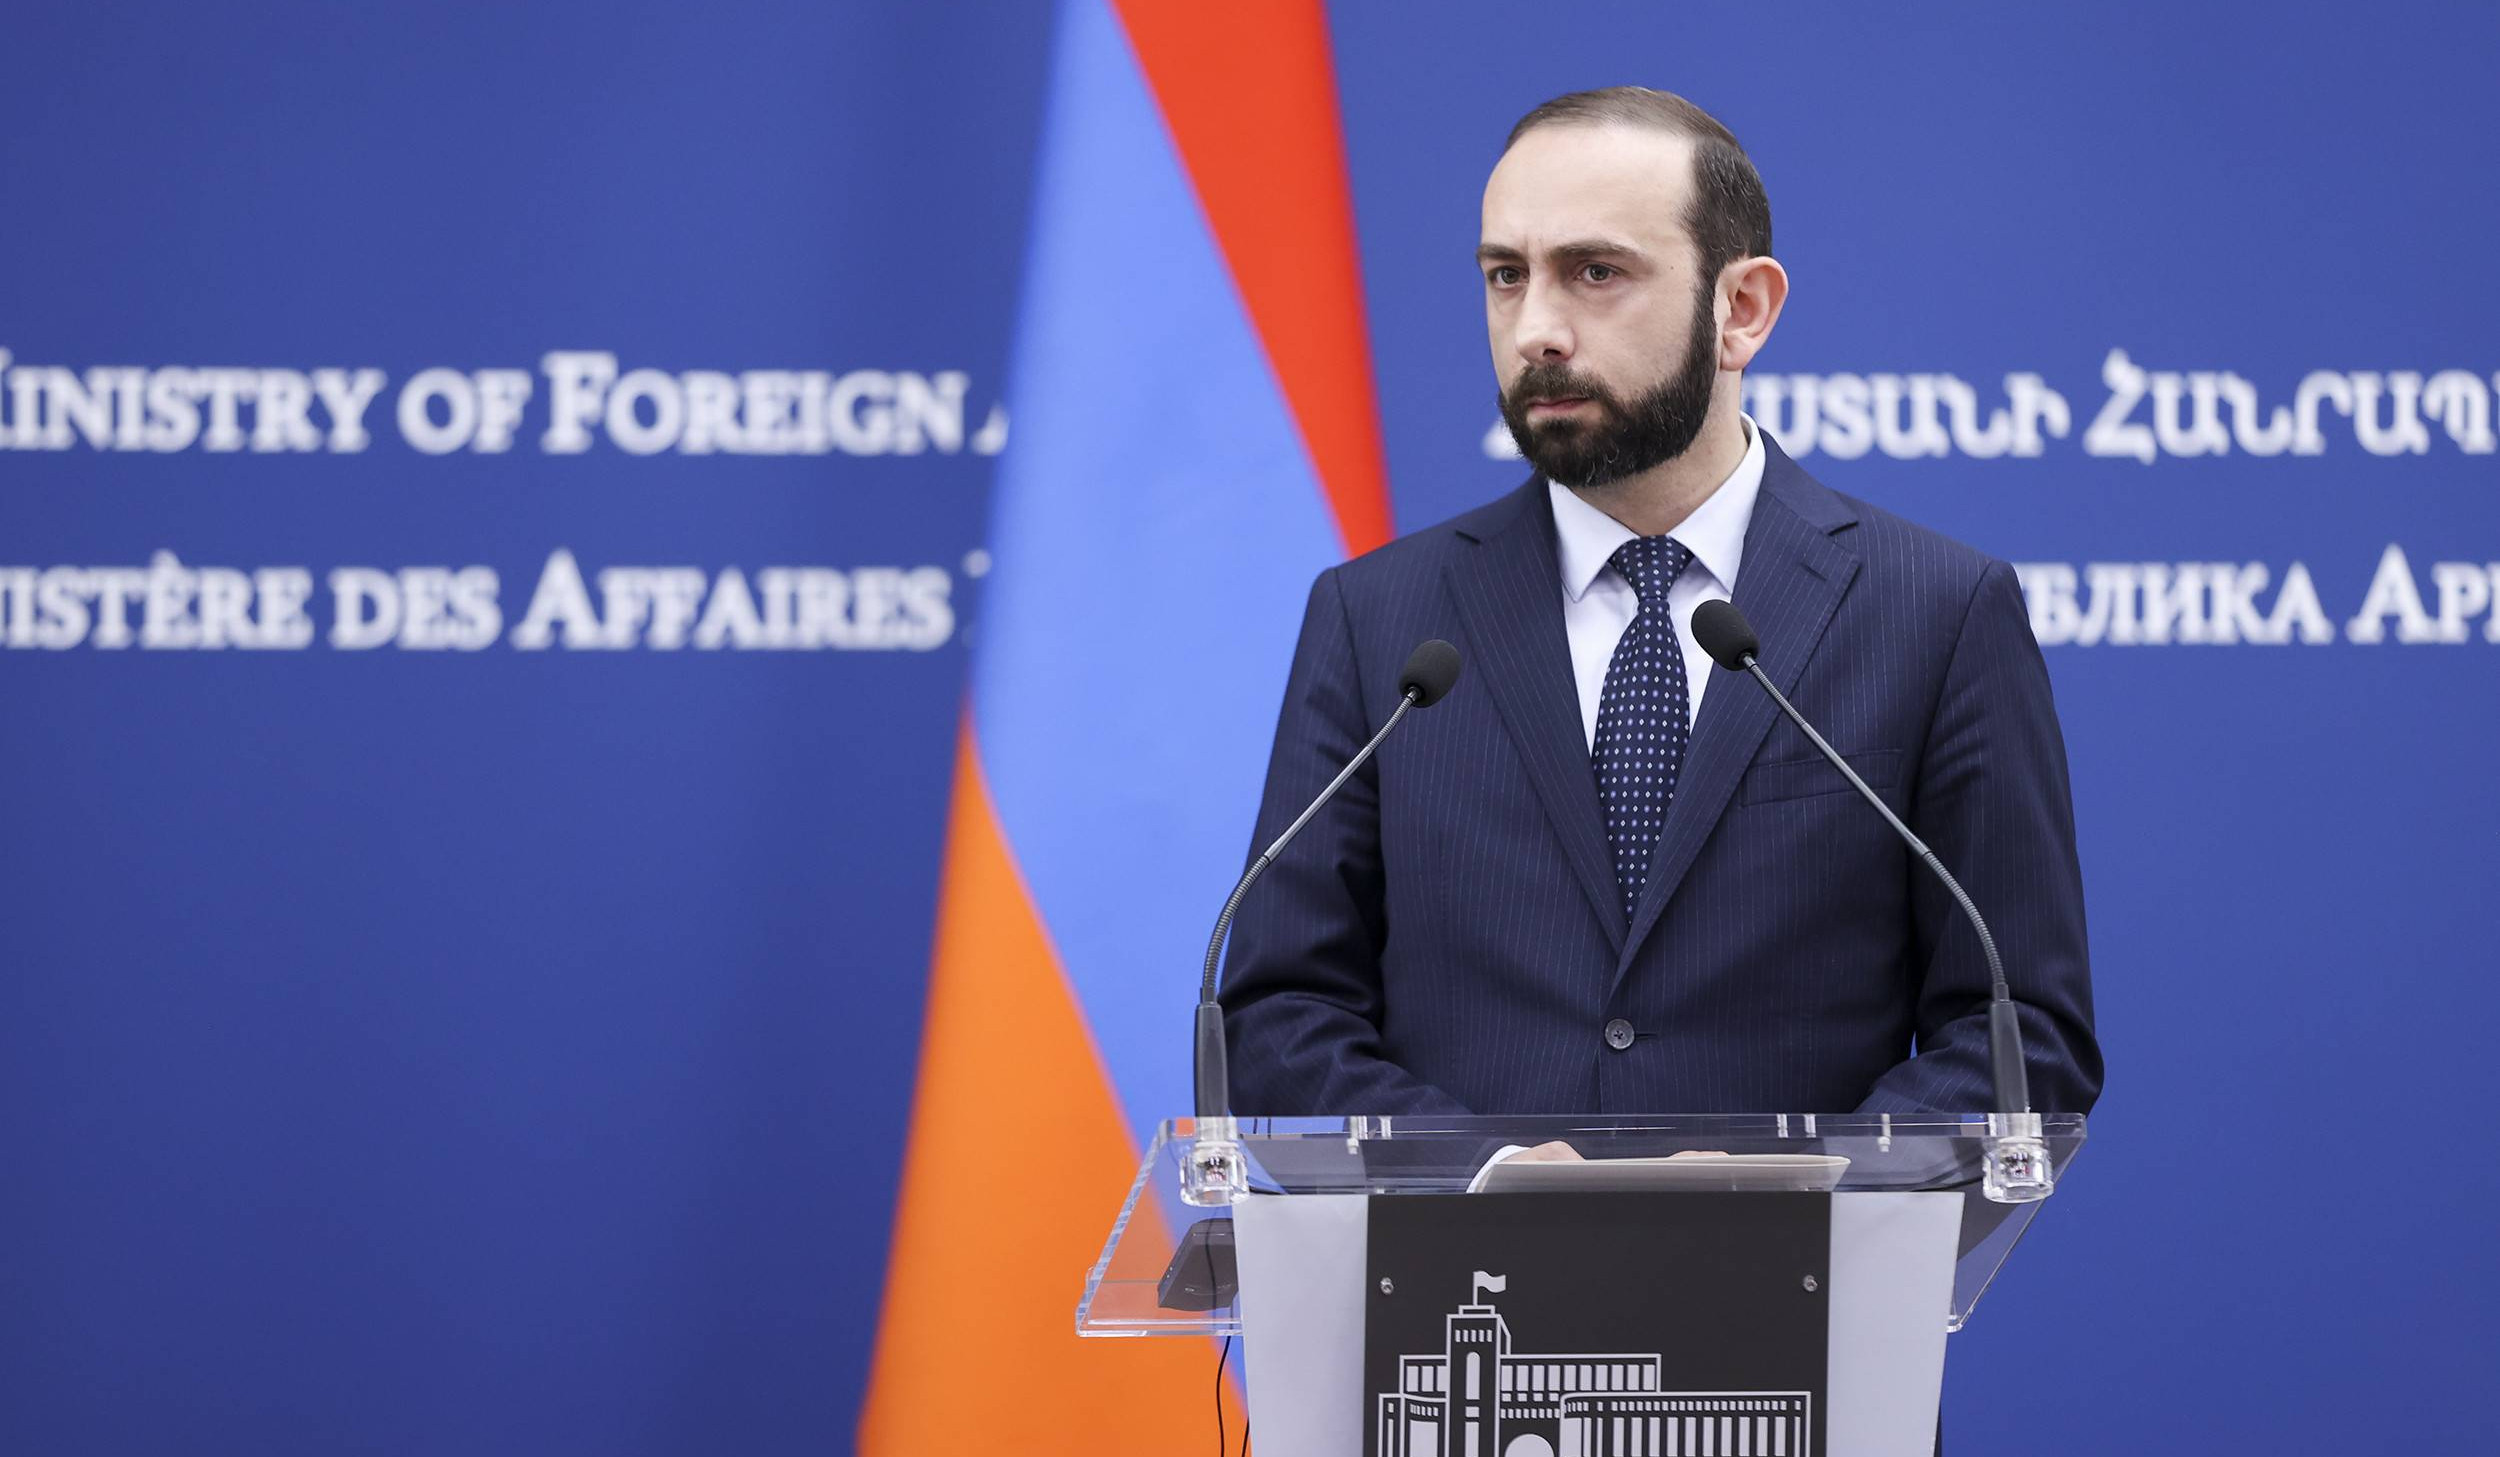 Remarks of Foreign Minister of Armenia Ararat Mirzoyan and answers to questions of journalists during joint press conference with Foreign Minister of Croatia Gordan Grlić Radman